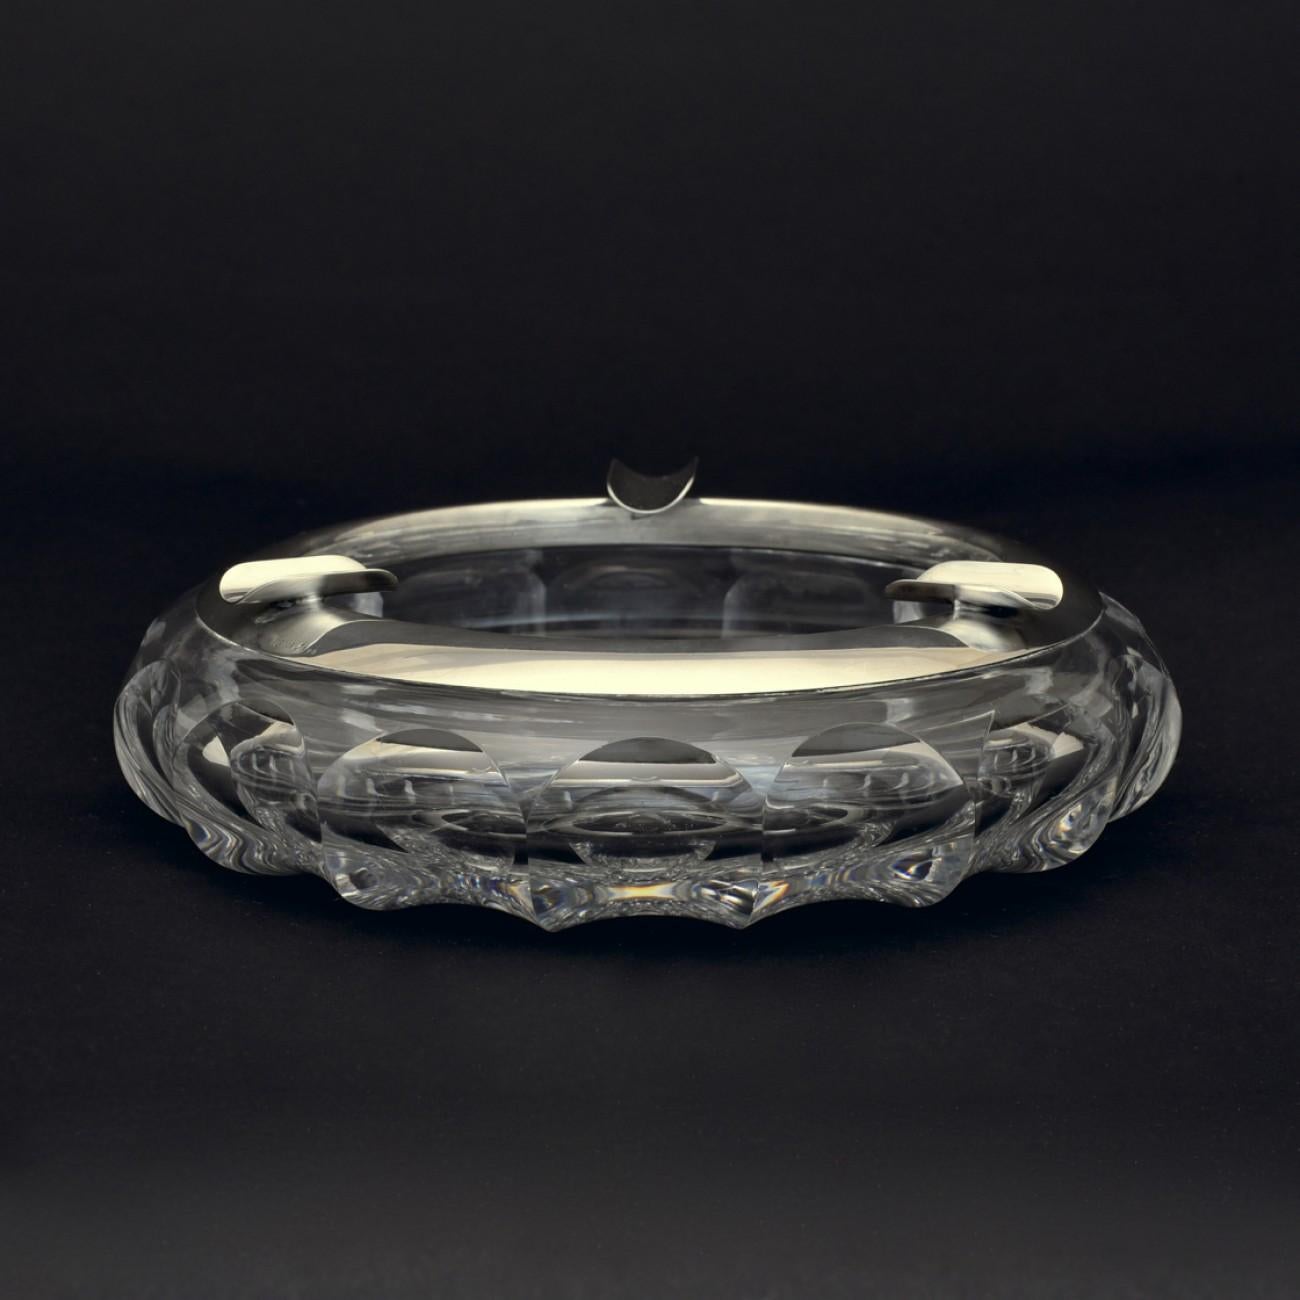 Cut crystal cigar ashtray with Sterling silver collar that has three rests for cigars; circa 1925. Stamped with silver marks of the Imperial crown and crescent moon for Germany and a purity stamp of 925 (the same purity of British sterling